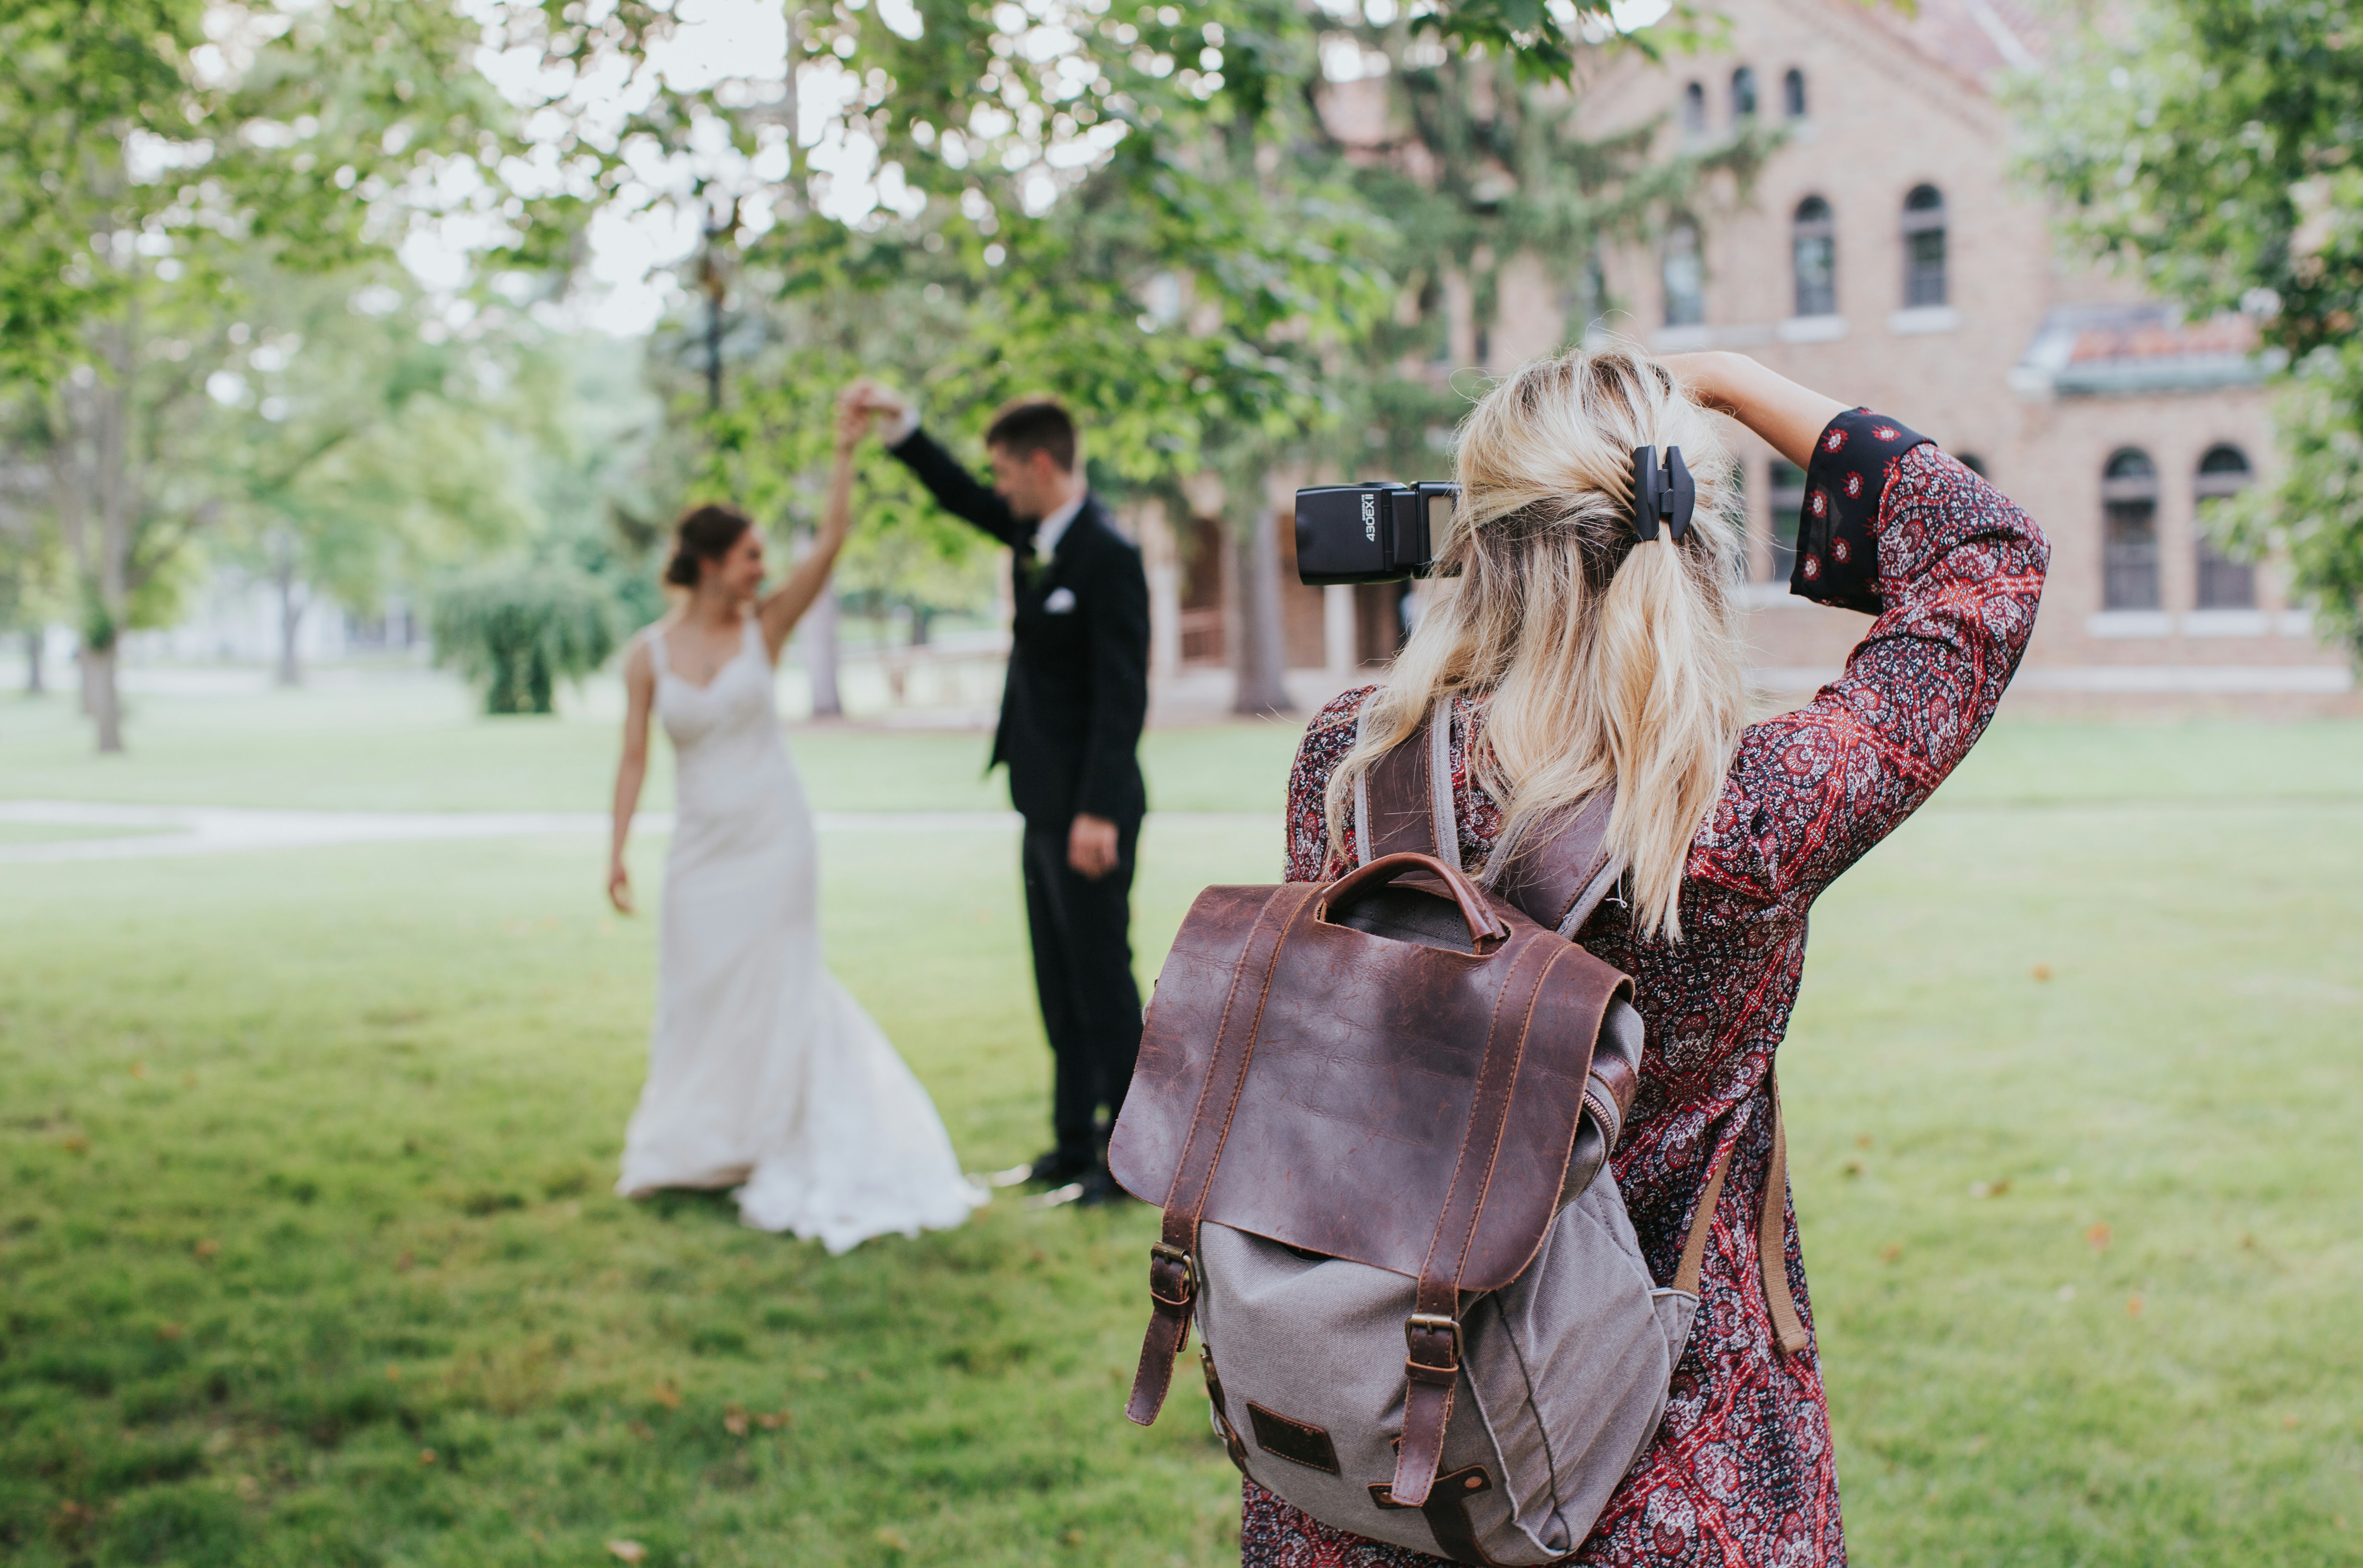 A couple posing for a wedding photographer | Source: Unsplash